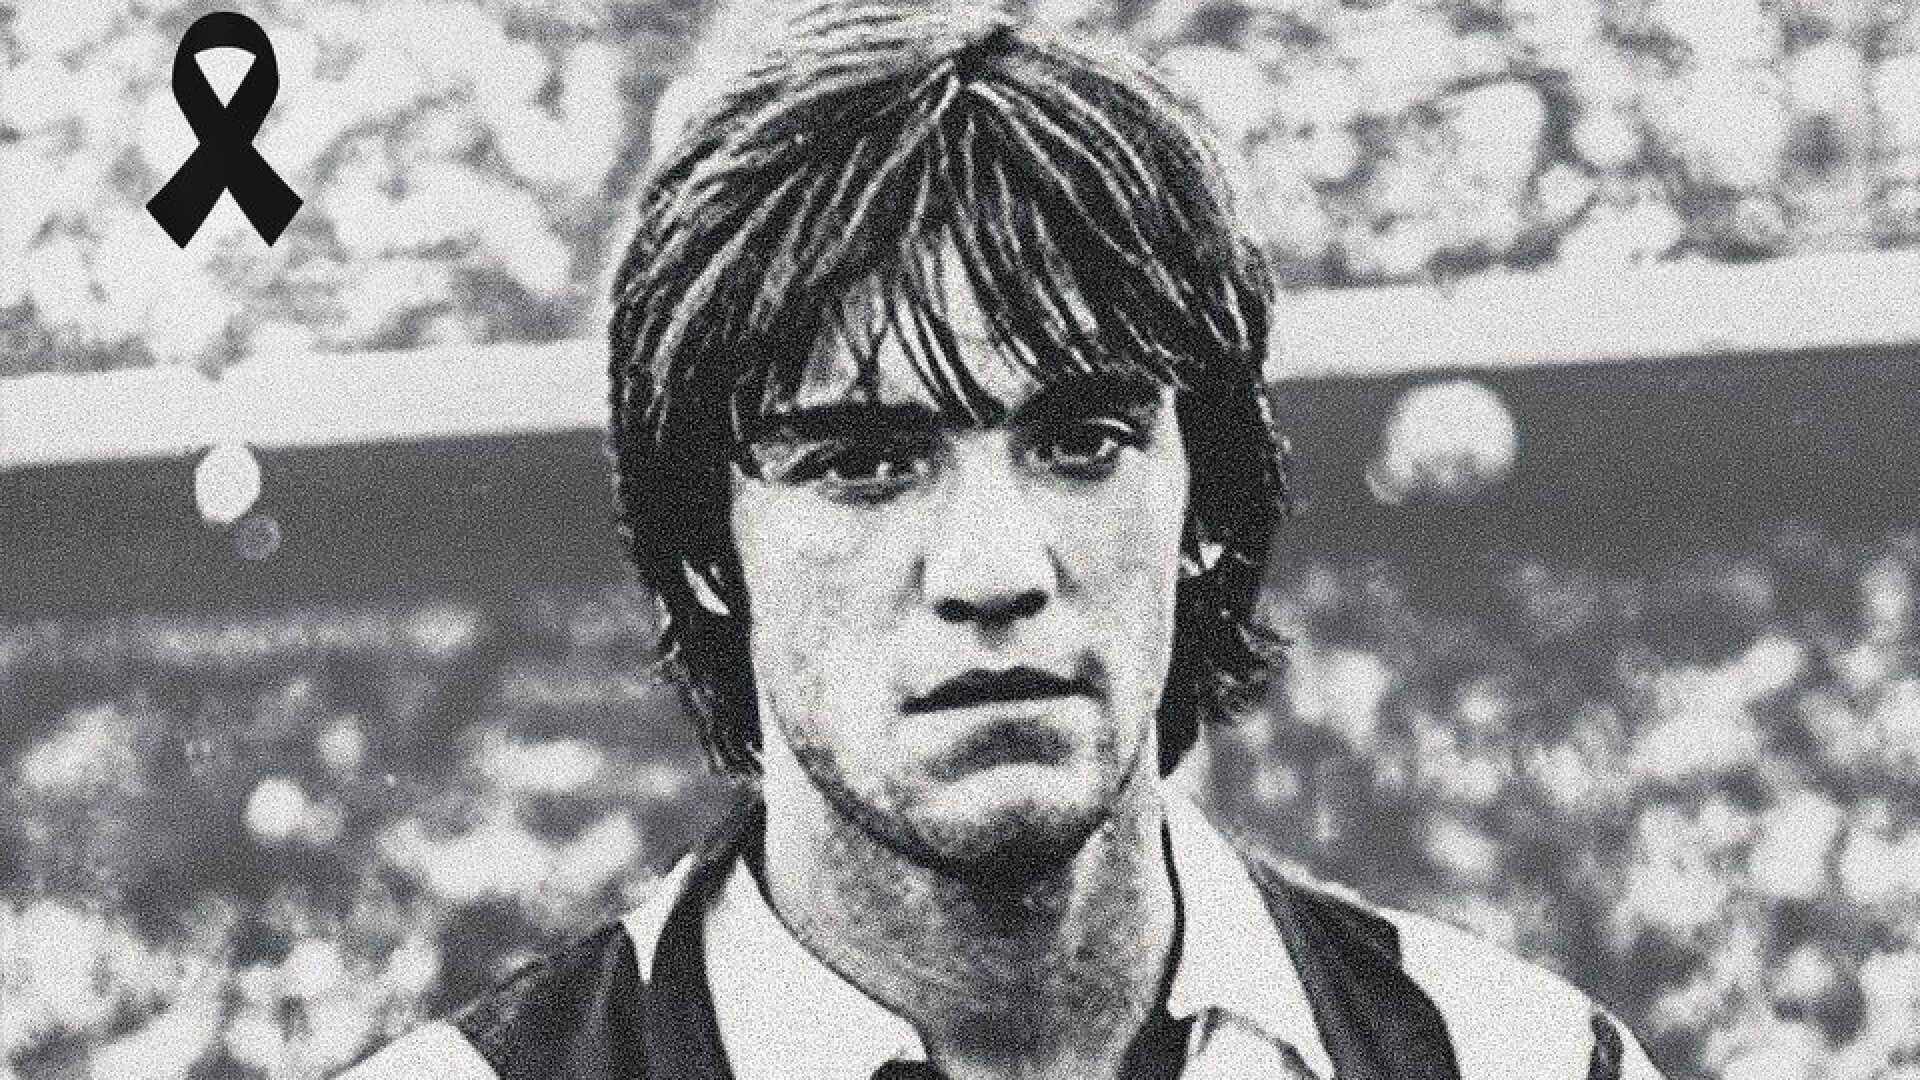 Marcos Alonso Pena